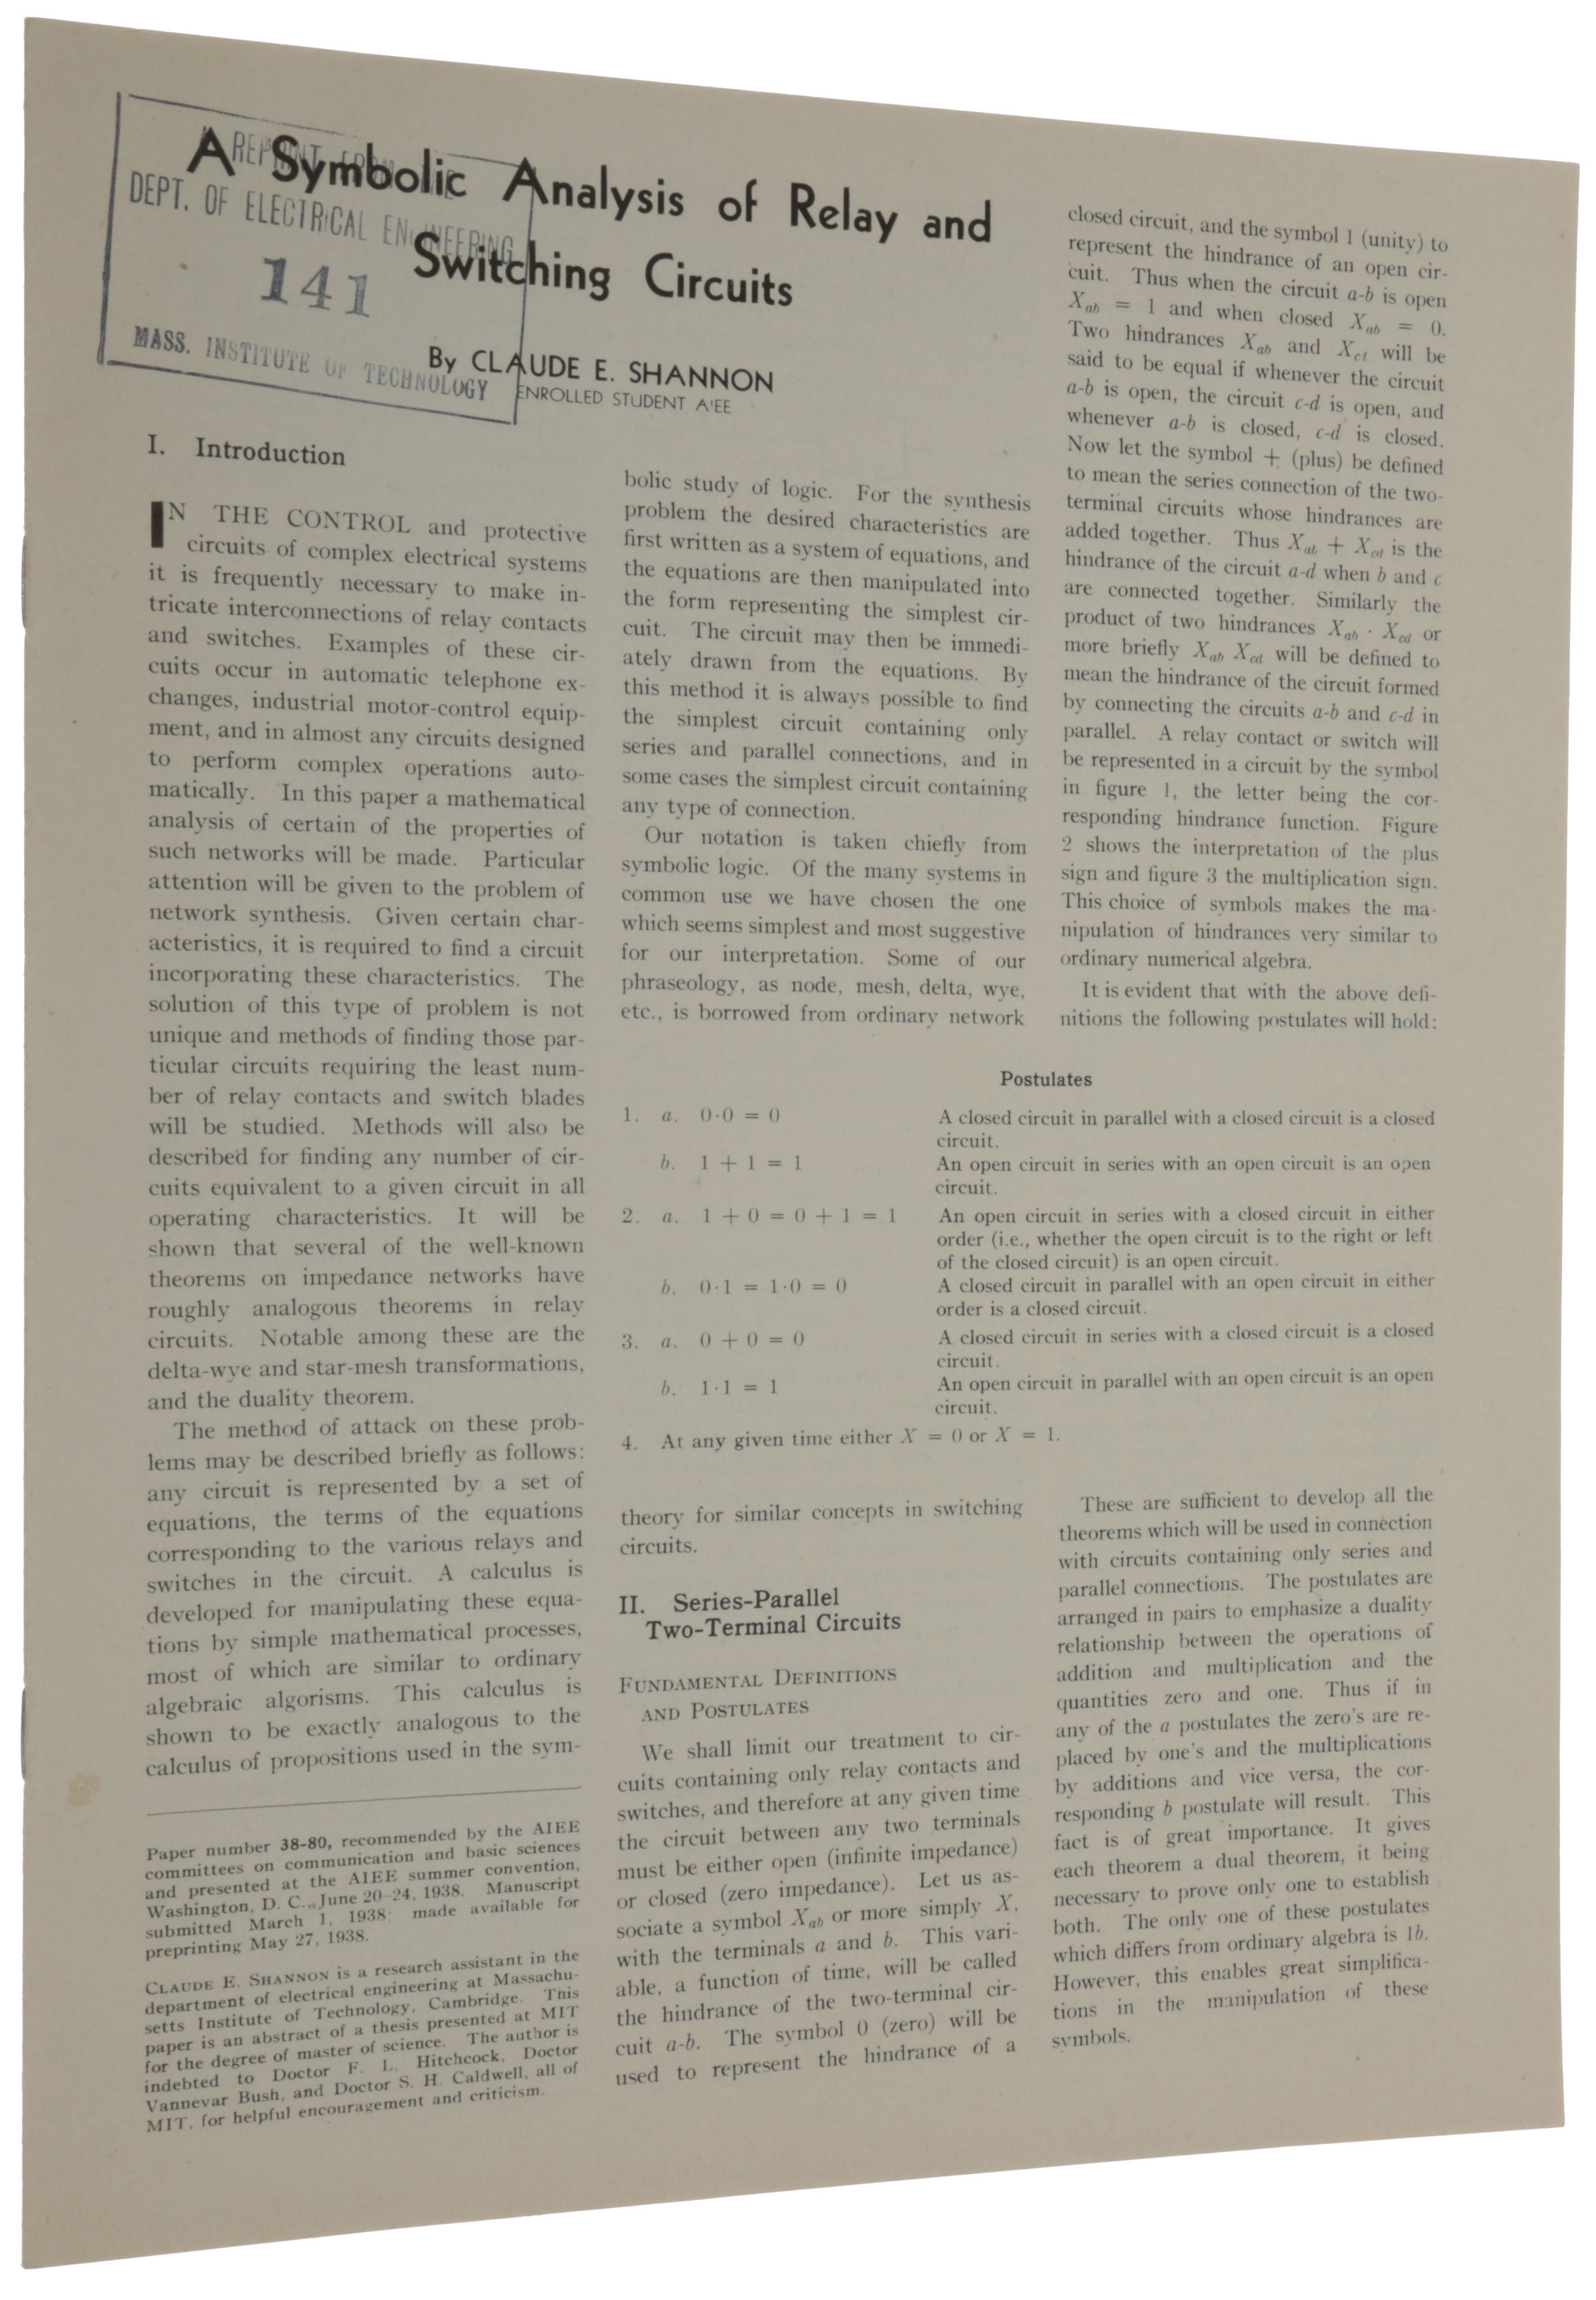 Item #5553 A Symbolic Analysis of Relay and Switching Circuits. Offprint from: Transactions of the American Institute of Electrical Engineers, vol. 57. Claude Elwood SHANNON.